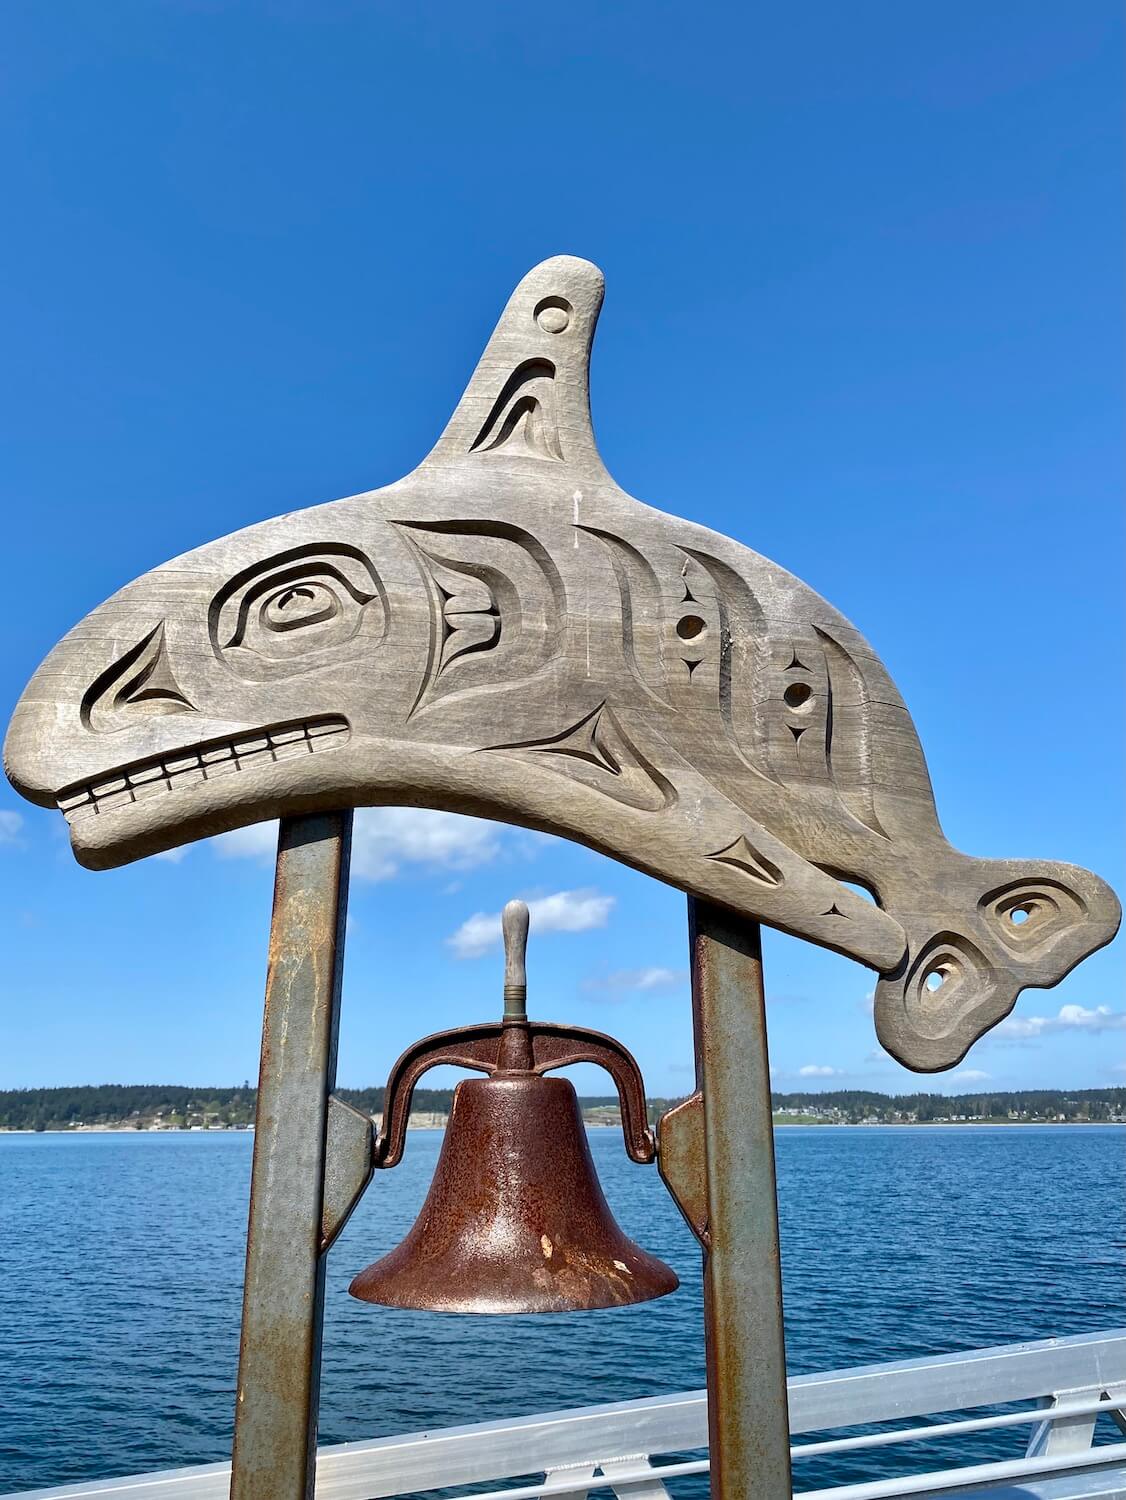 A native carving depicting an orca whale proudly displays on top of a copper colored bell on a pier in Coupeville, Washington on Whidbey Island.